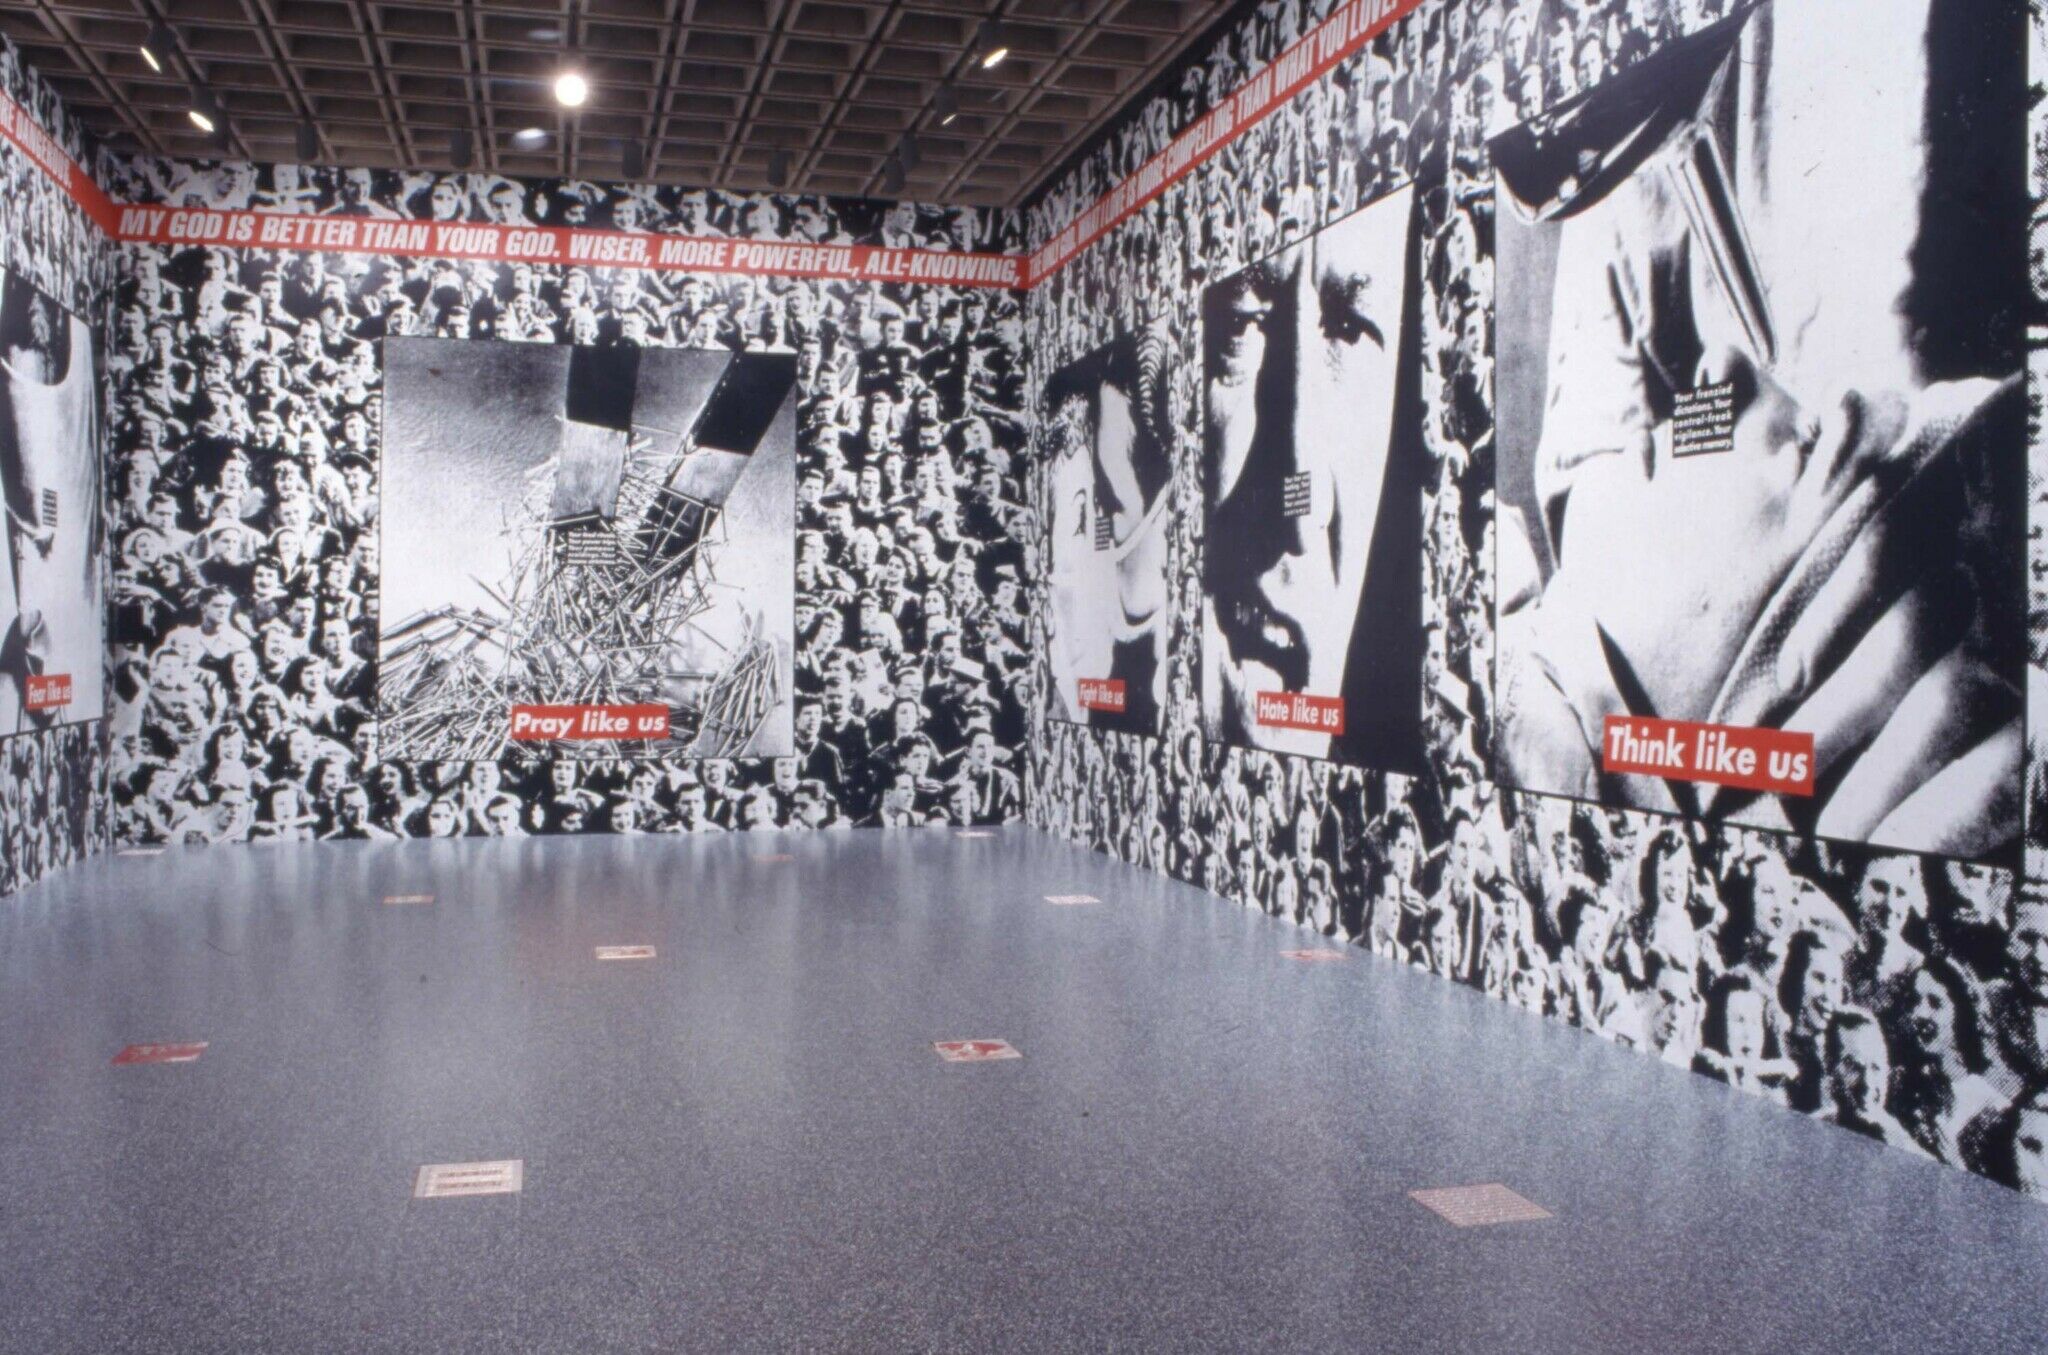 A gallery with walls covered in a black and white photograph of a crowd, along with other works of art displayed on the walls.